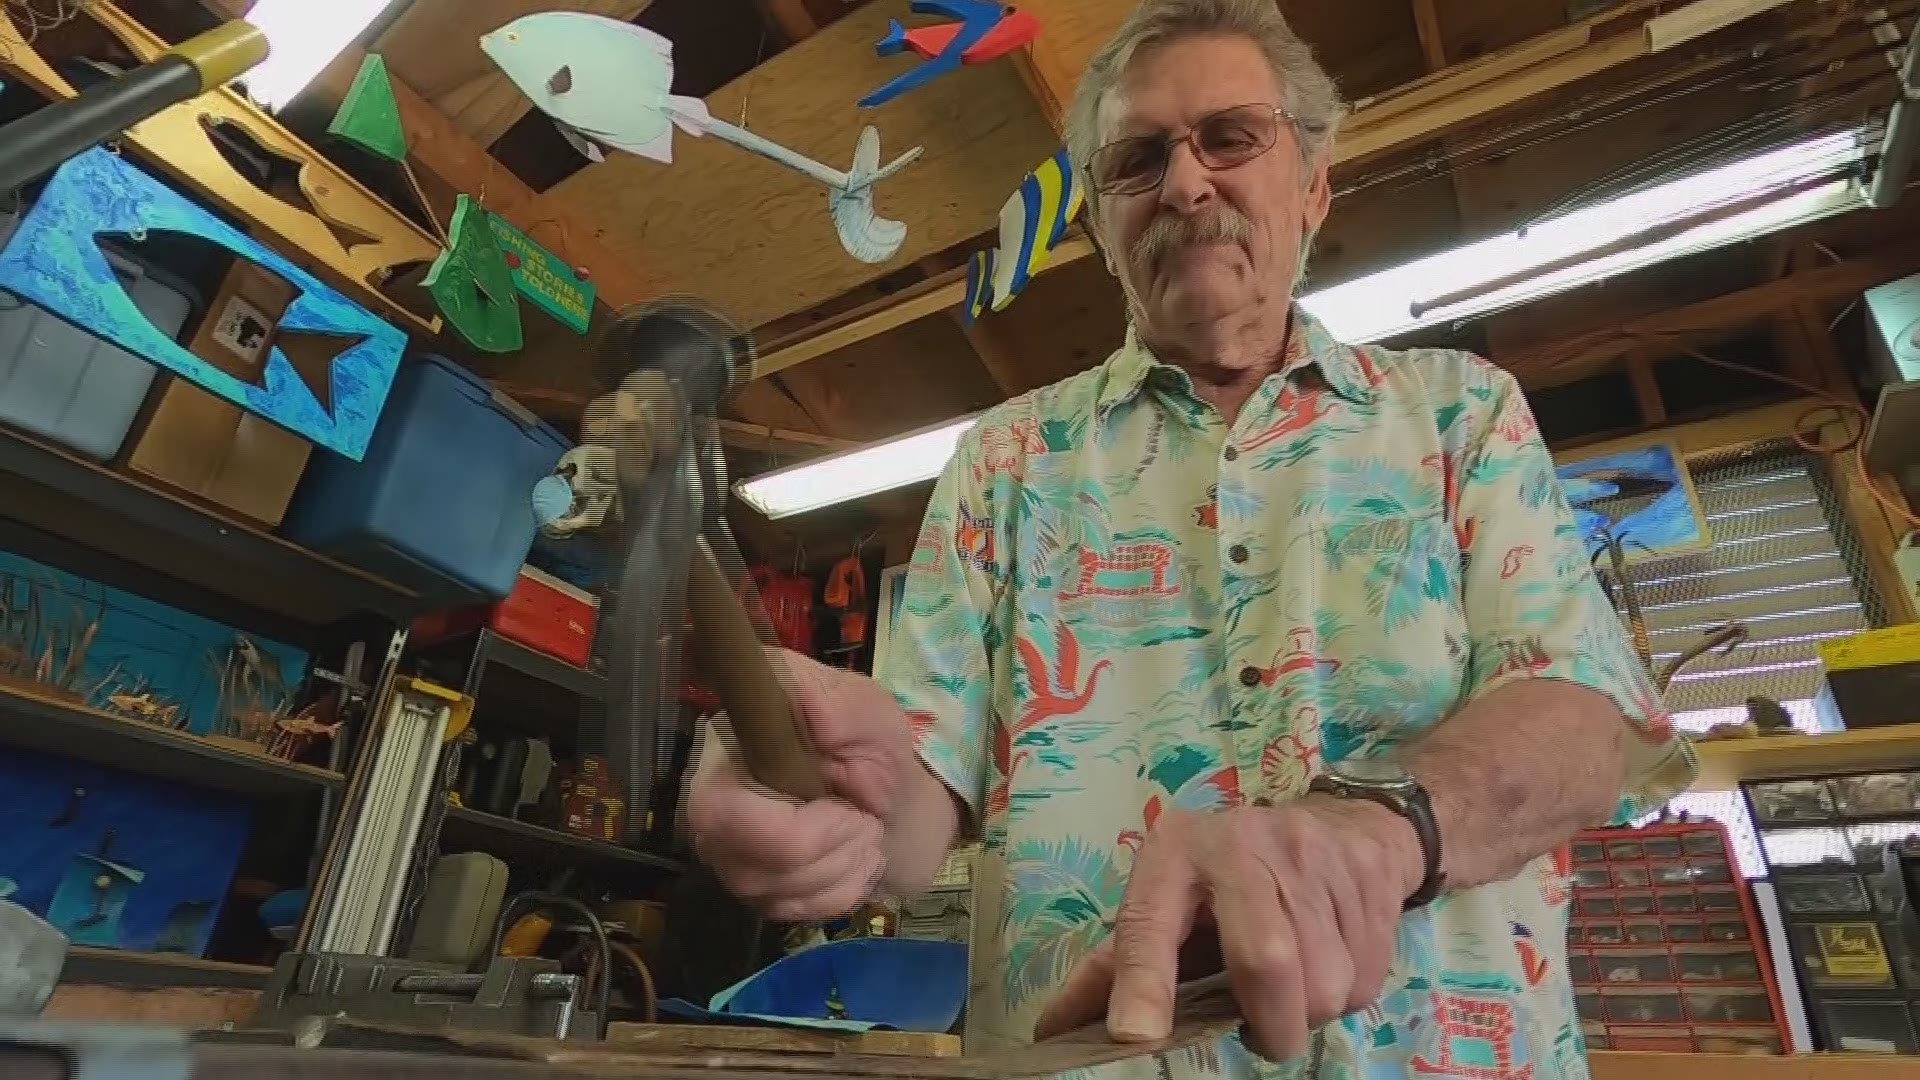 Oceanside Marine survives war and cancer but keeps on smiling by turning trash to treasure with his Junk Art.